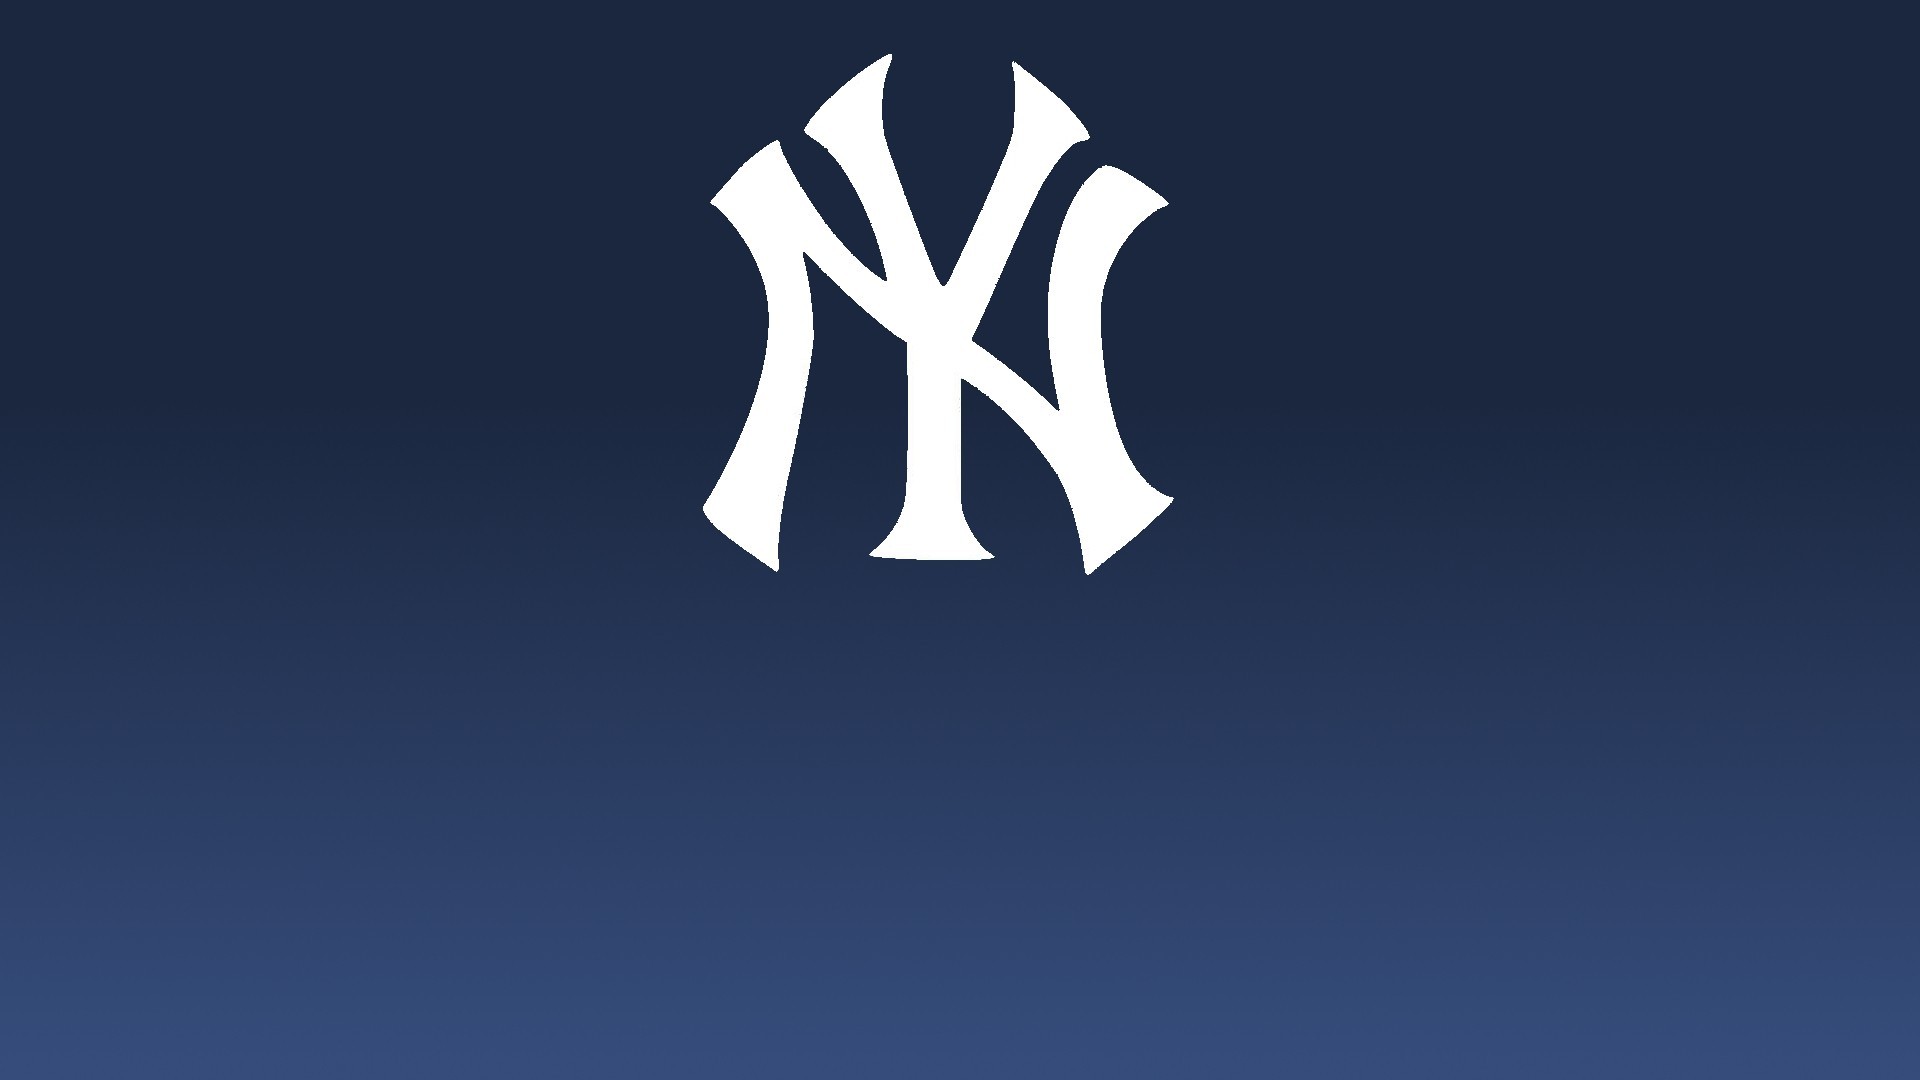 NY Yankees Wallpaper HD with high-resolution 1920x1080 pixel. You can use this wallpaper for Mac Desktop Wallpaper, Laptop Screensavers, Android Wallpapers, Tablet or iPhone Home Screen and another mobile phone device